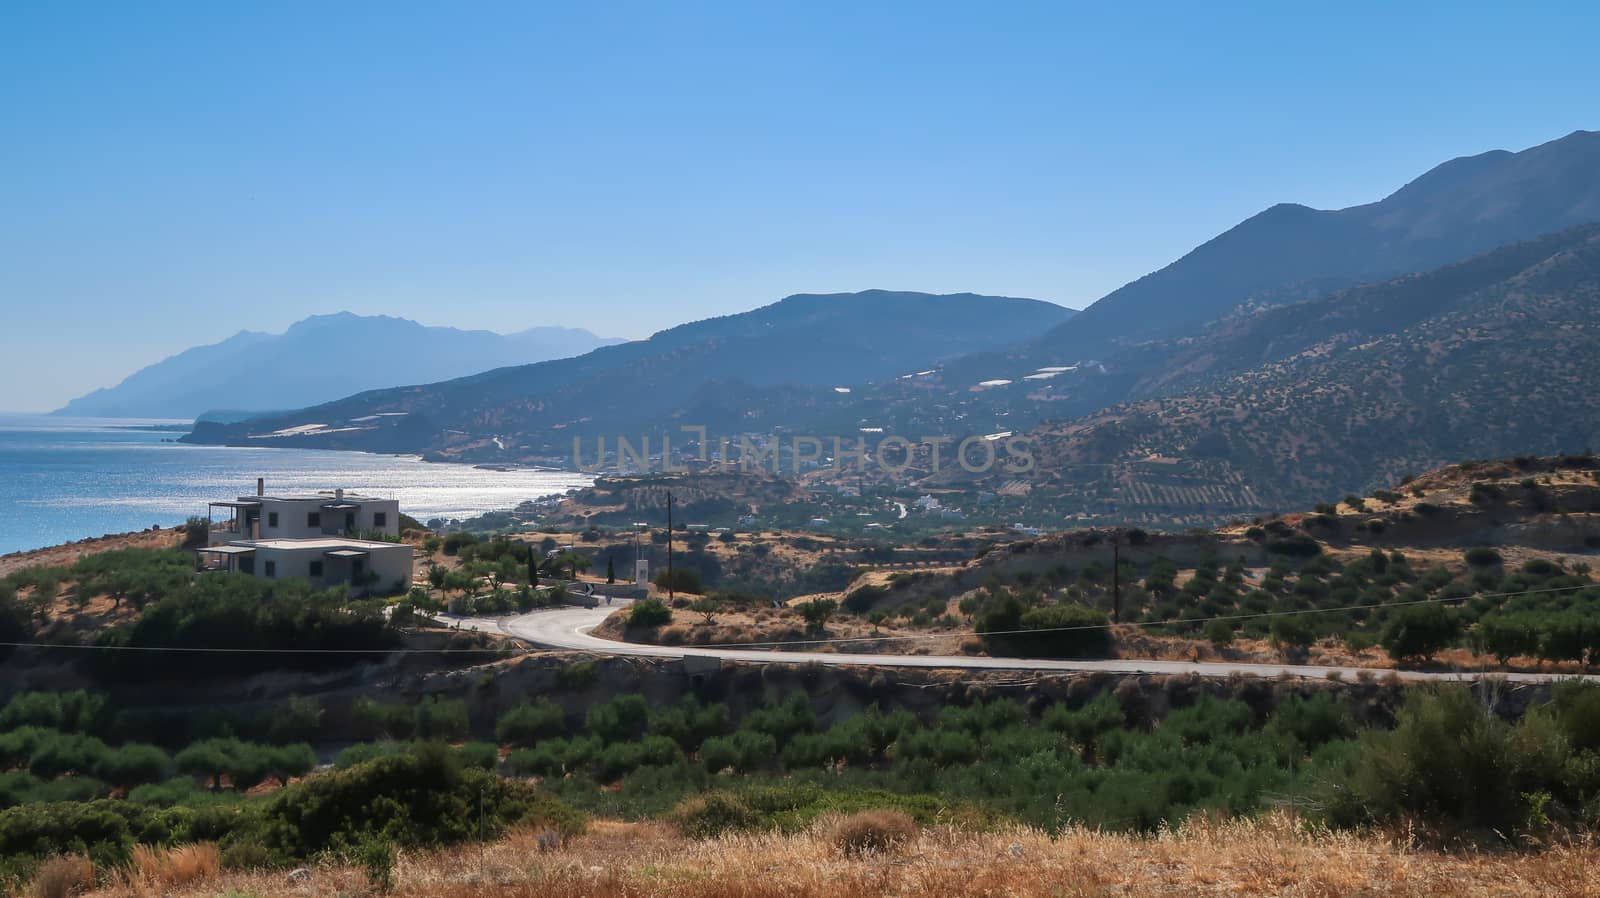 Landscape of the villages, sea and mountains near Keratokampos, Crete by codrinn